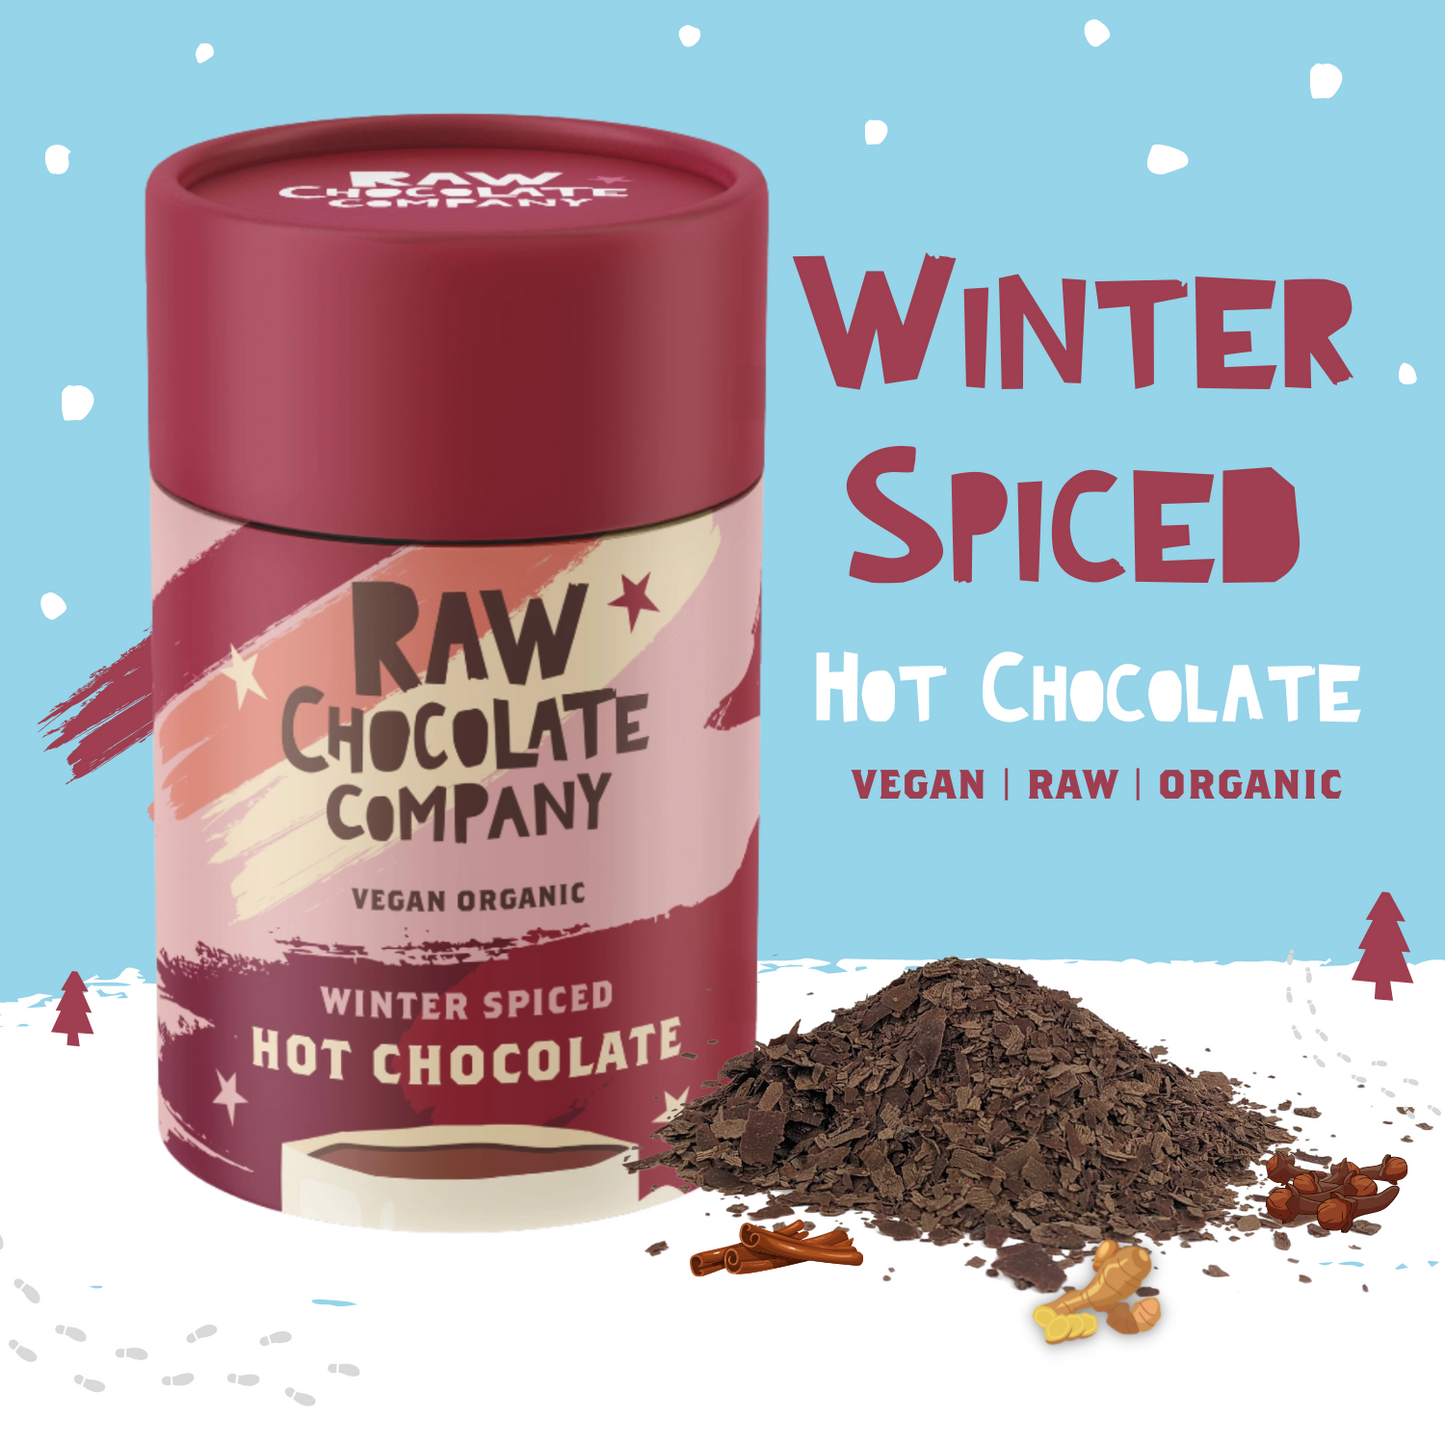 Winter Spiced Hot Chocolate